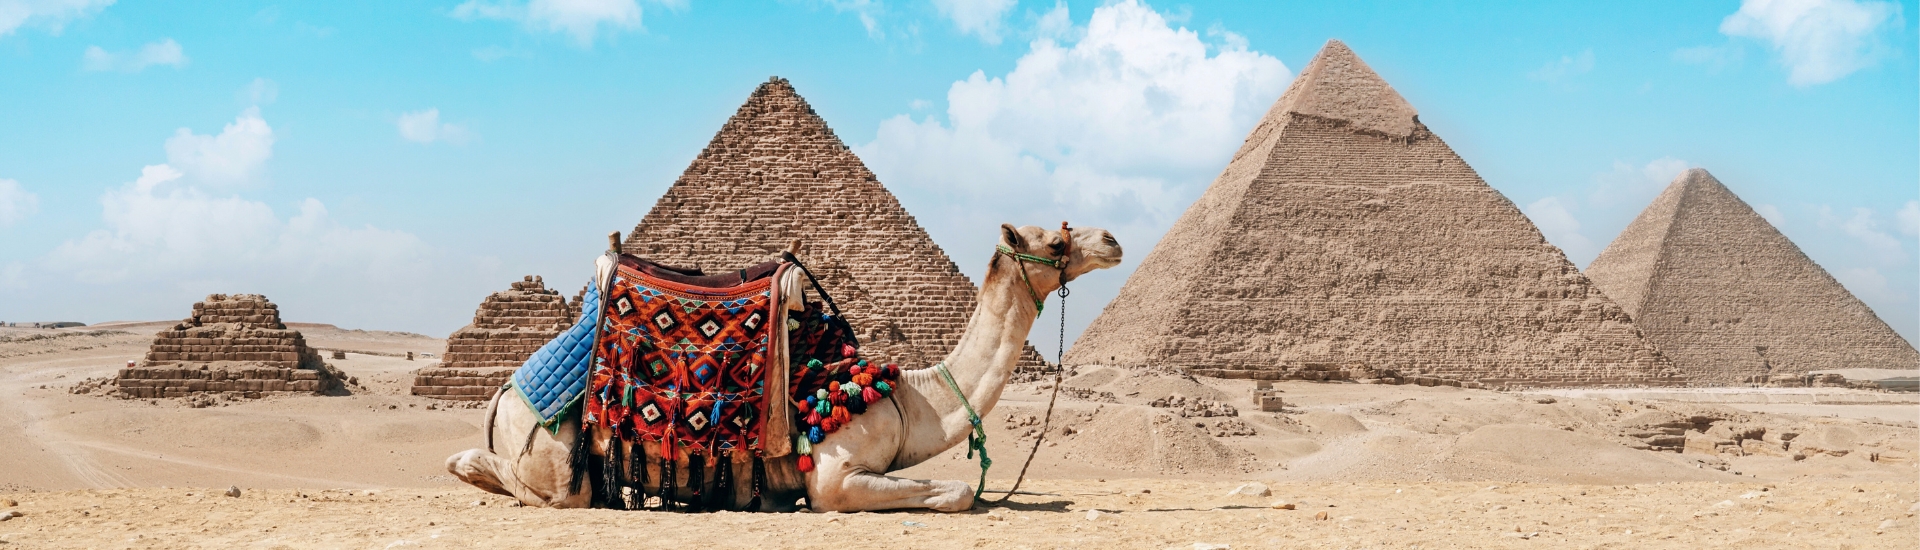 Camel in front of Pyramids of Giza near Cairo, Egypt